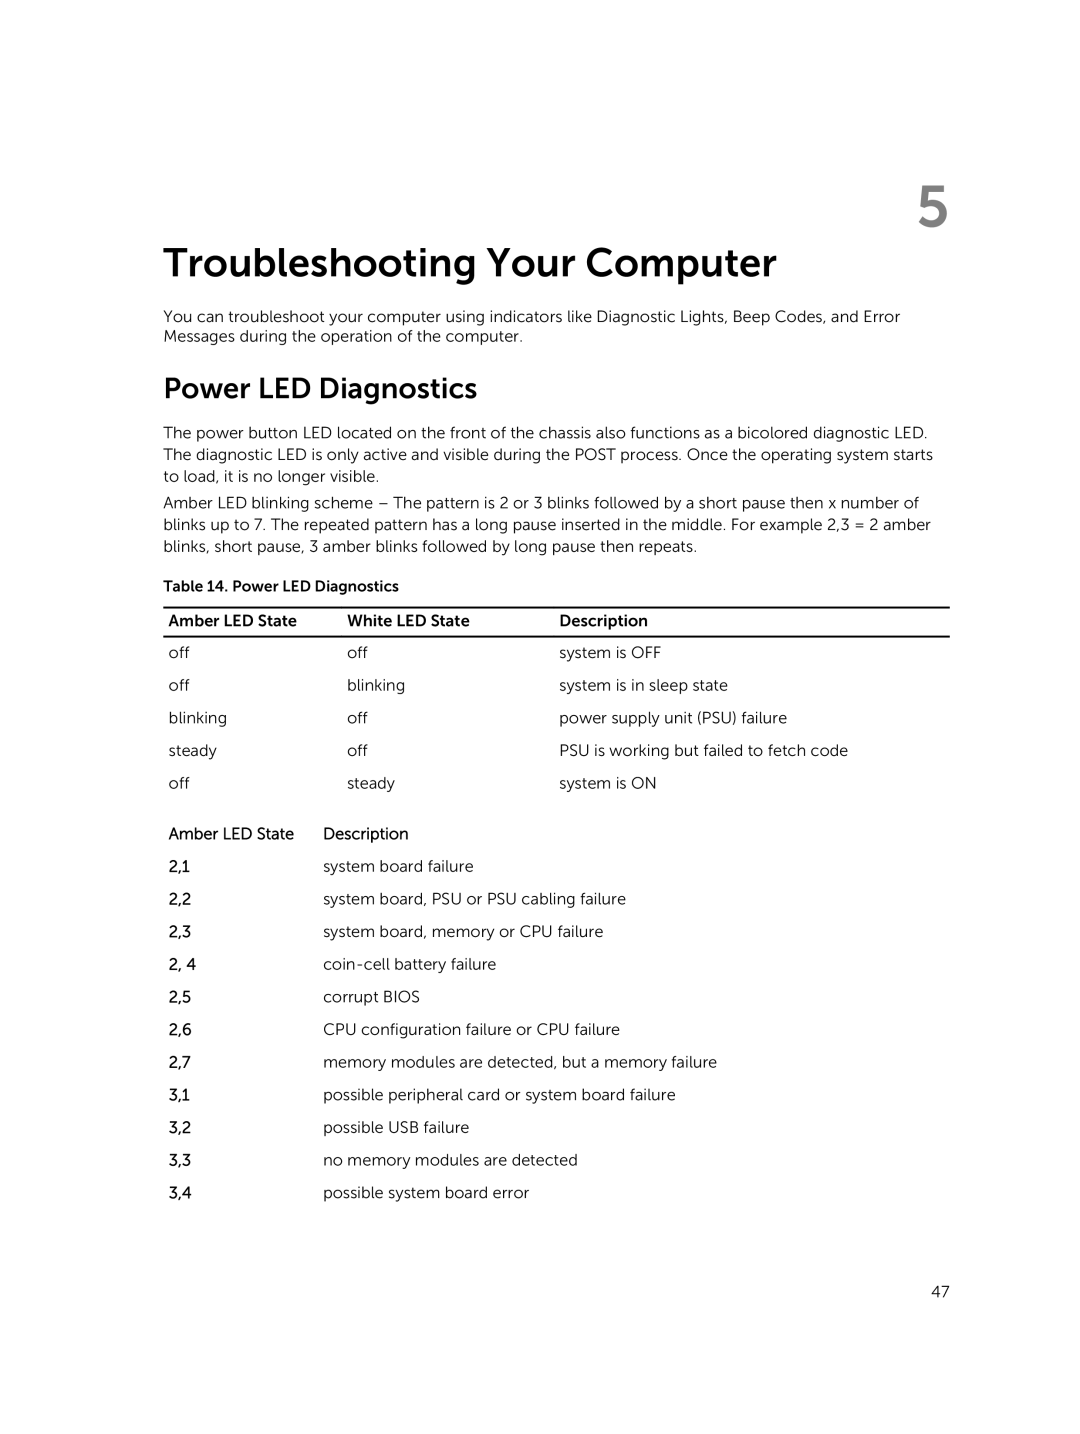 Dell 9020 owner manual Troubleshooting Your Computer, Power LED Diagnostics 